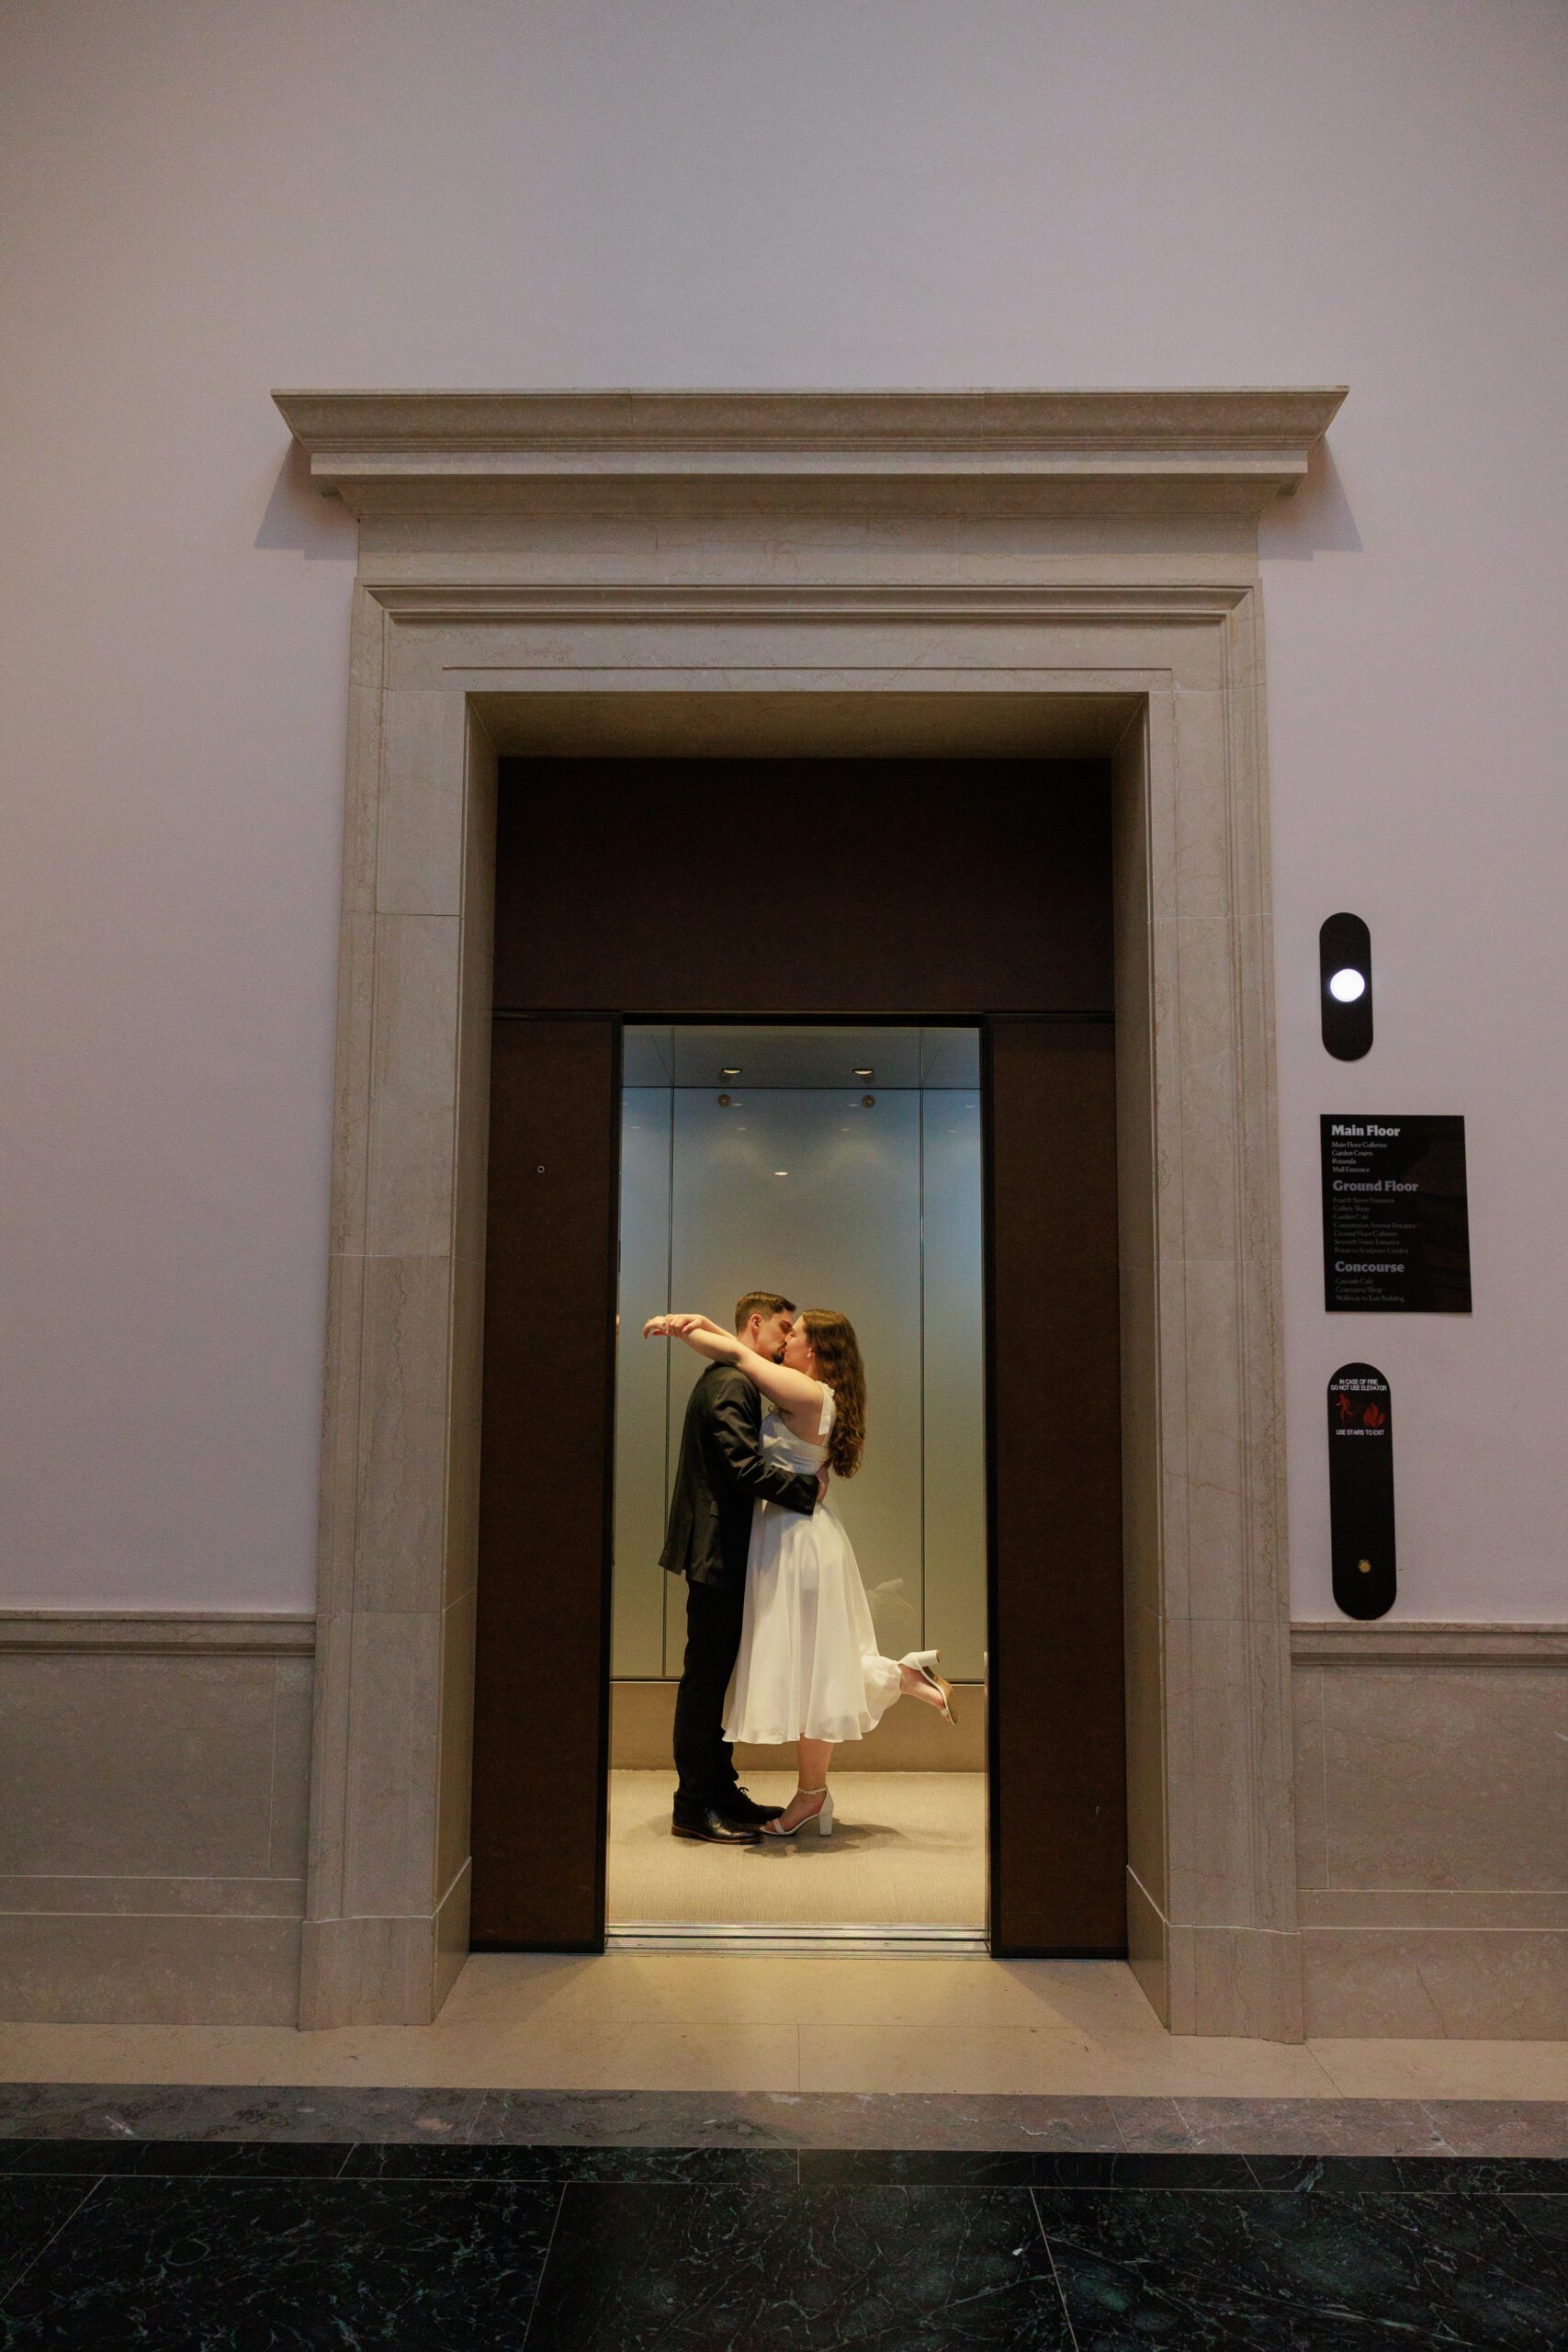 Newly engaged couple shares a kiss in an elevator at the national gallery of art